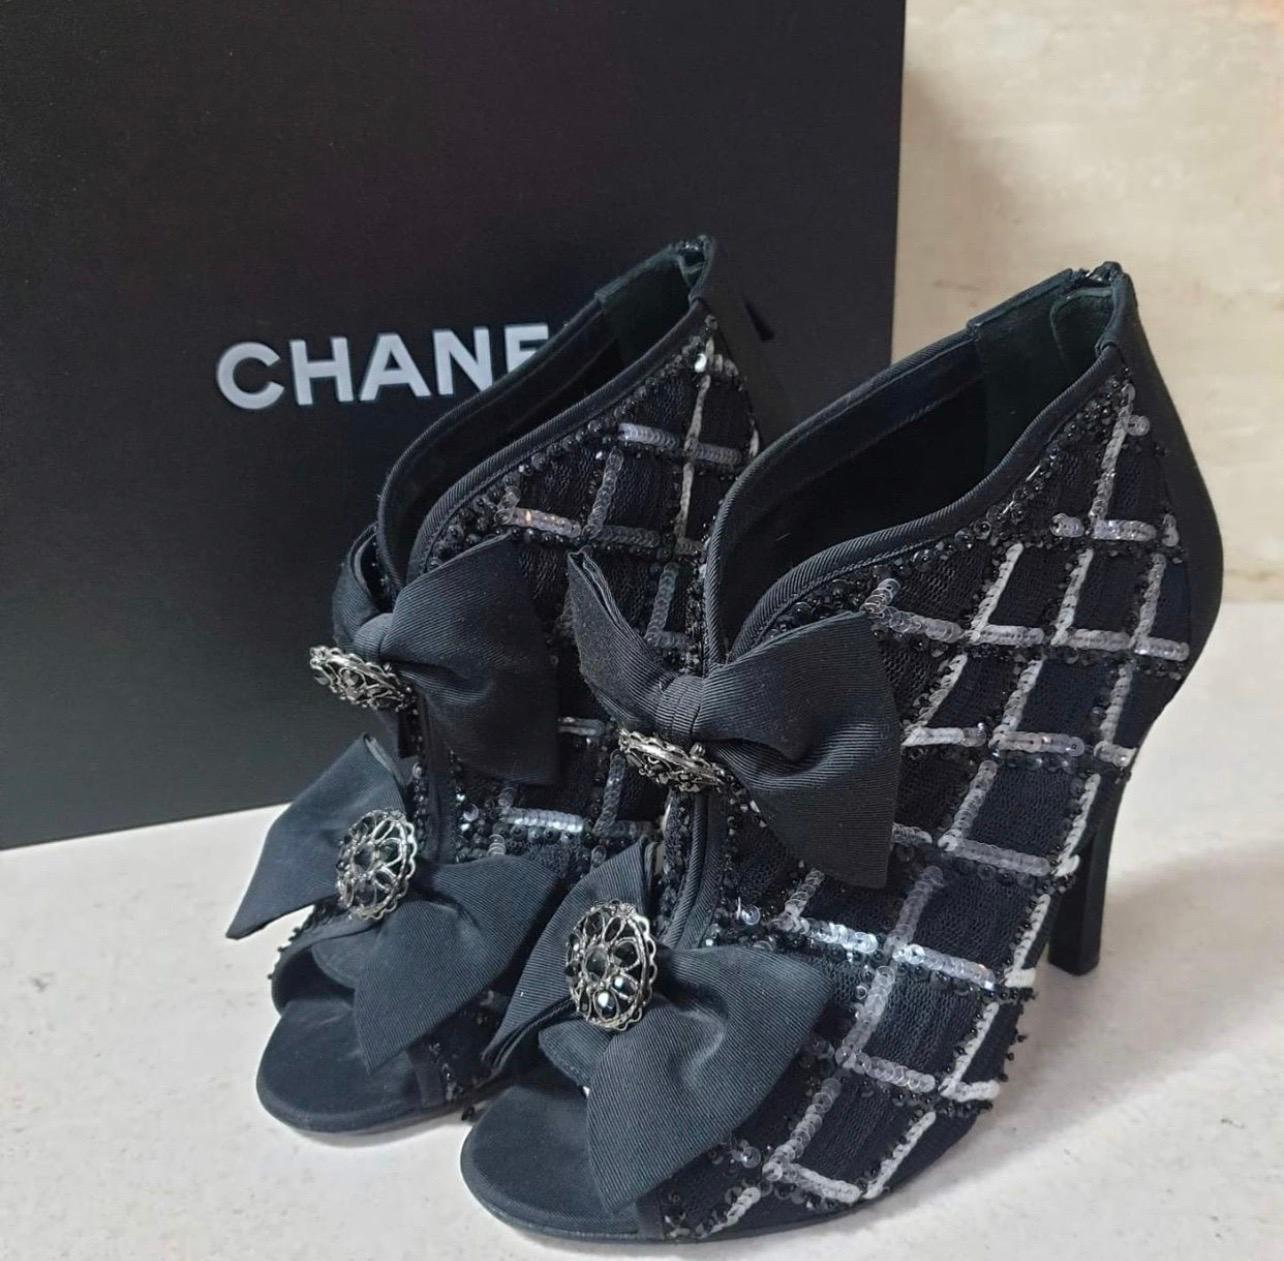 Chanel Textile Open Toe Booties

From 2009.

Excellent condition.

No original packaging.